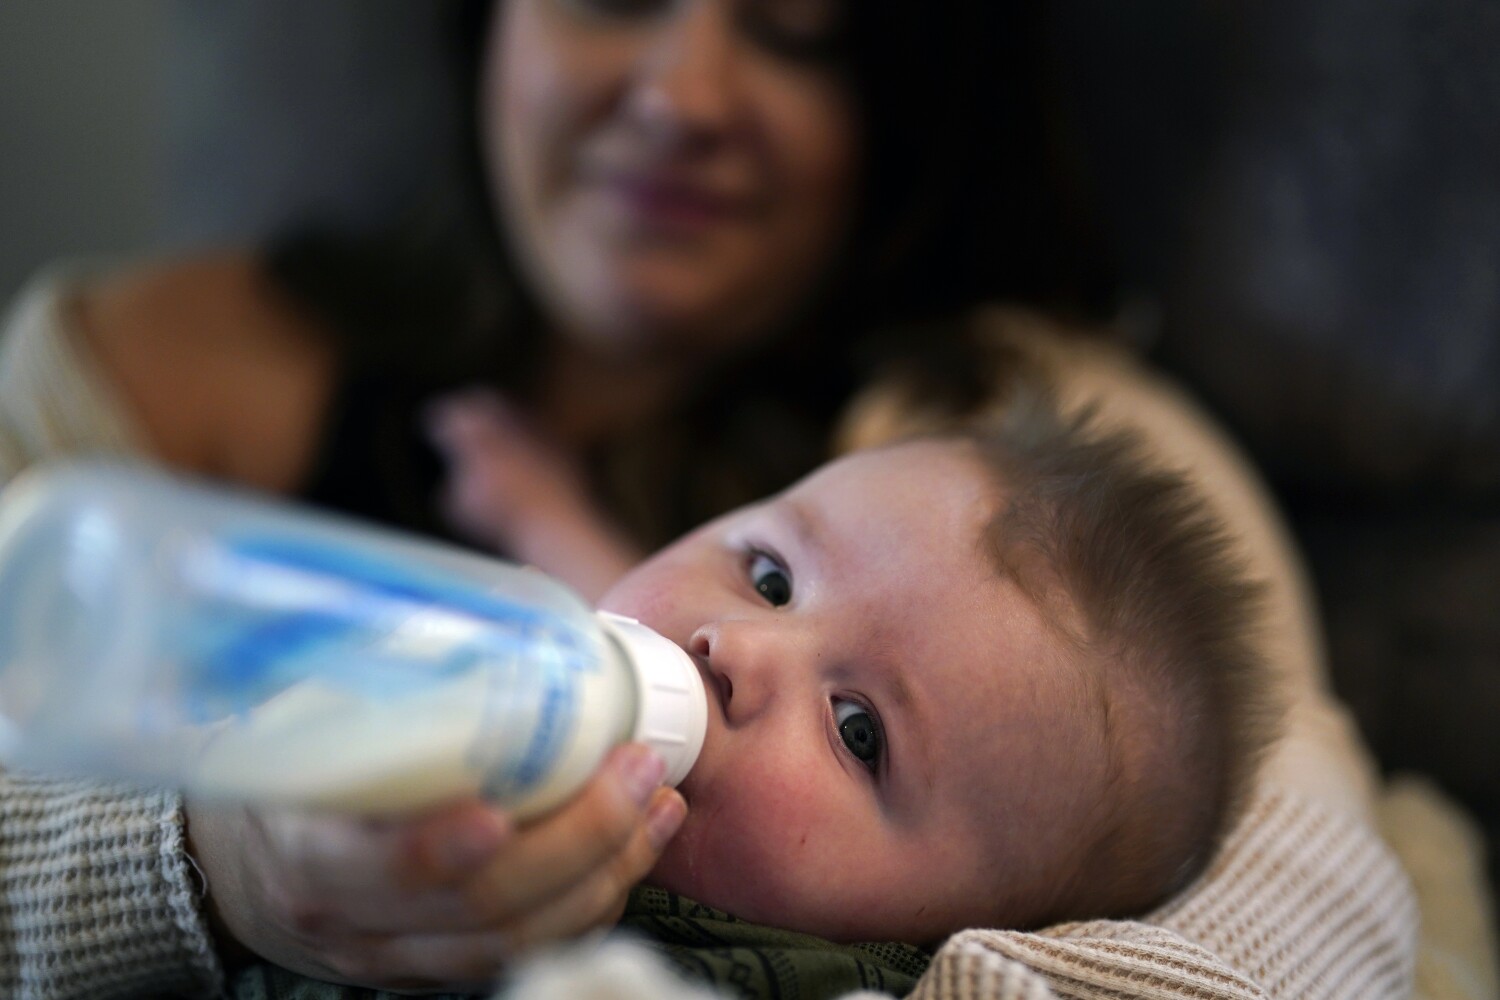 Deal reached with FDA to reopen Michigan infant formula plant